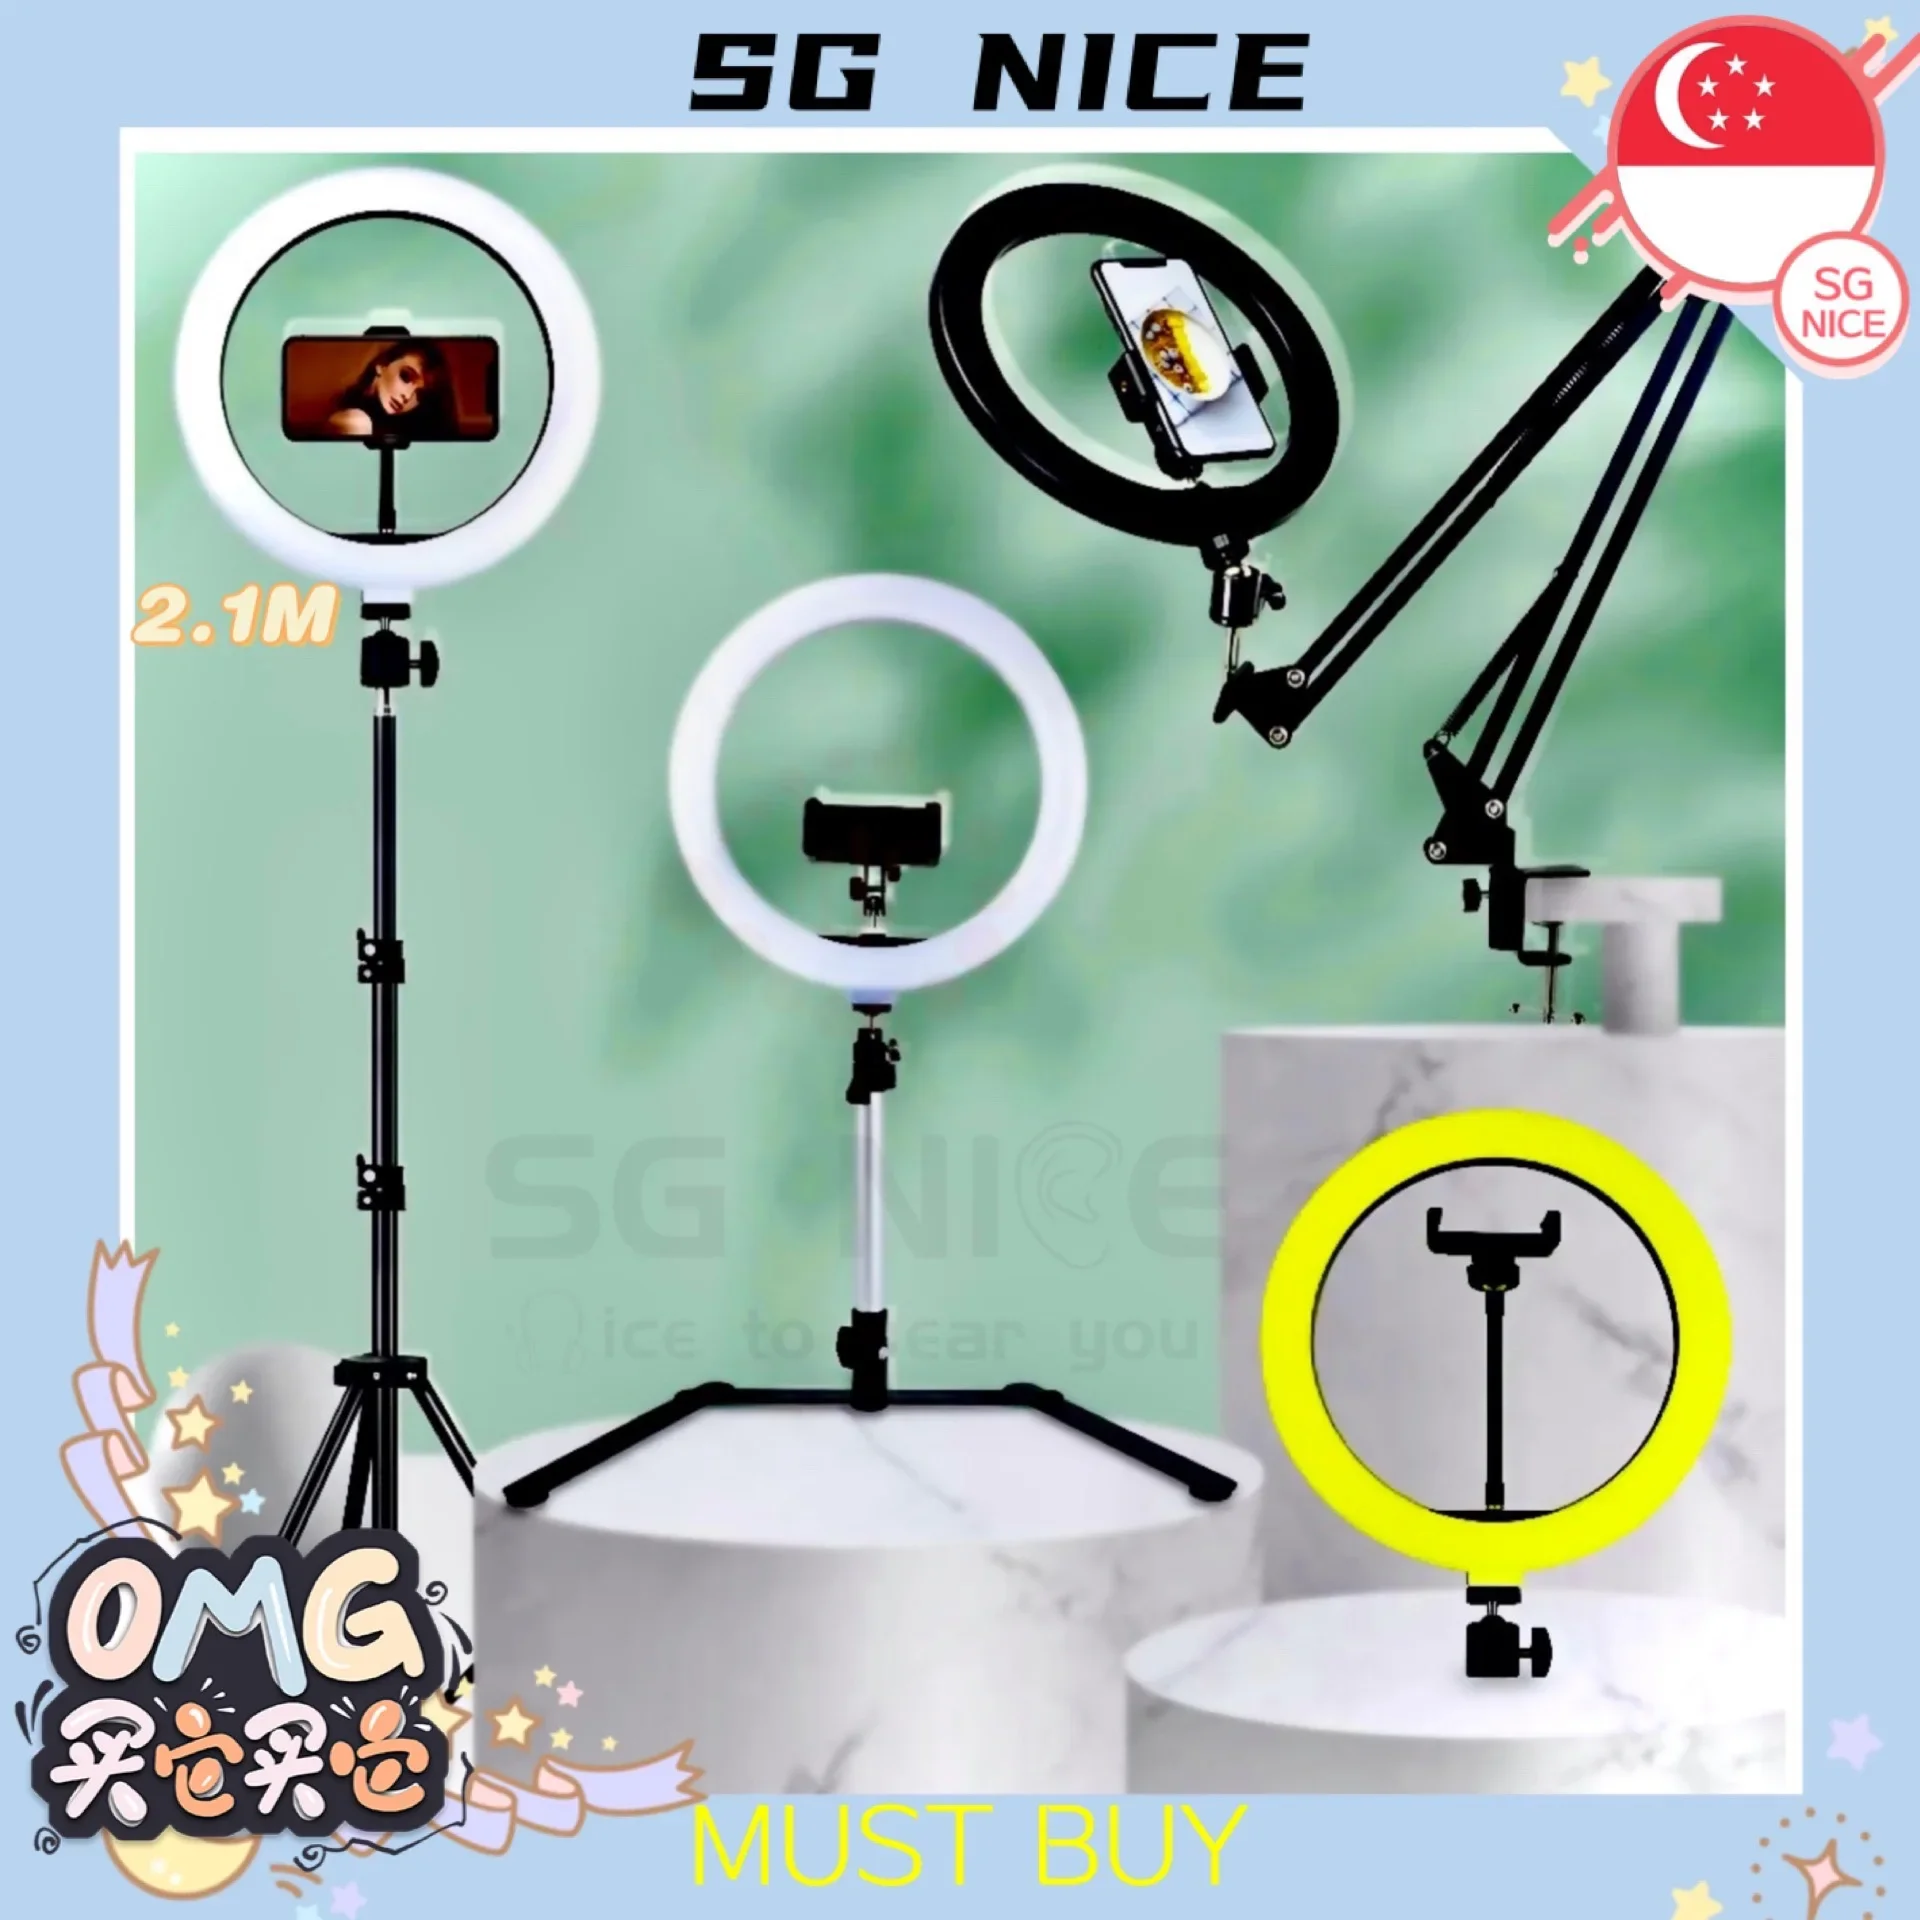 ⚡In Stock⚡26cm LED Selfie Ring Light Set with 2.1M Tripod Photography Dimmable Youtube Video Live Photo Studio Light